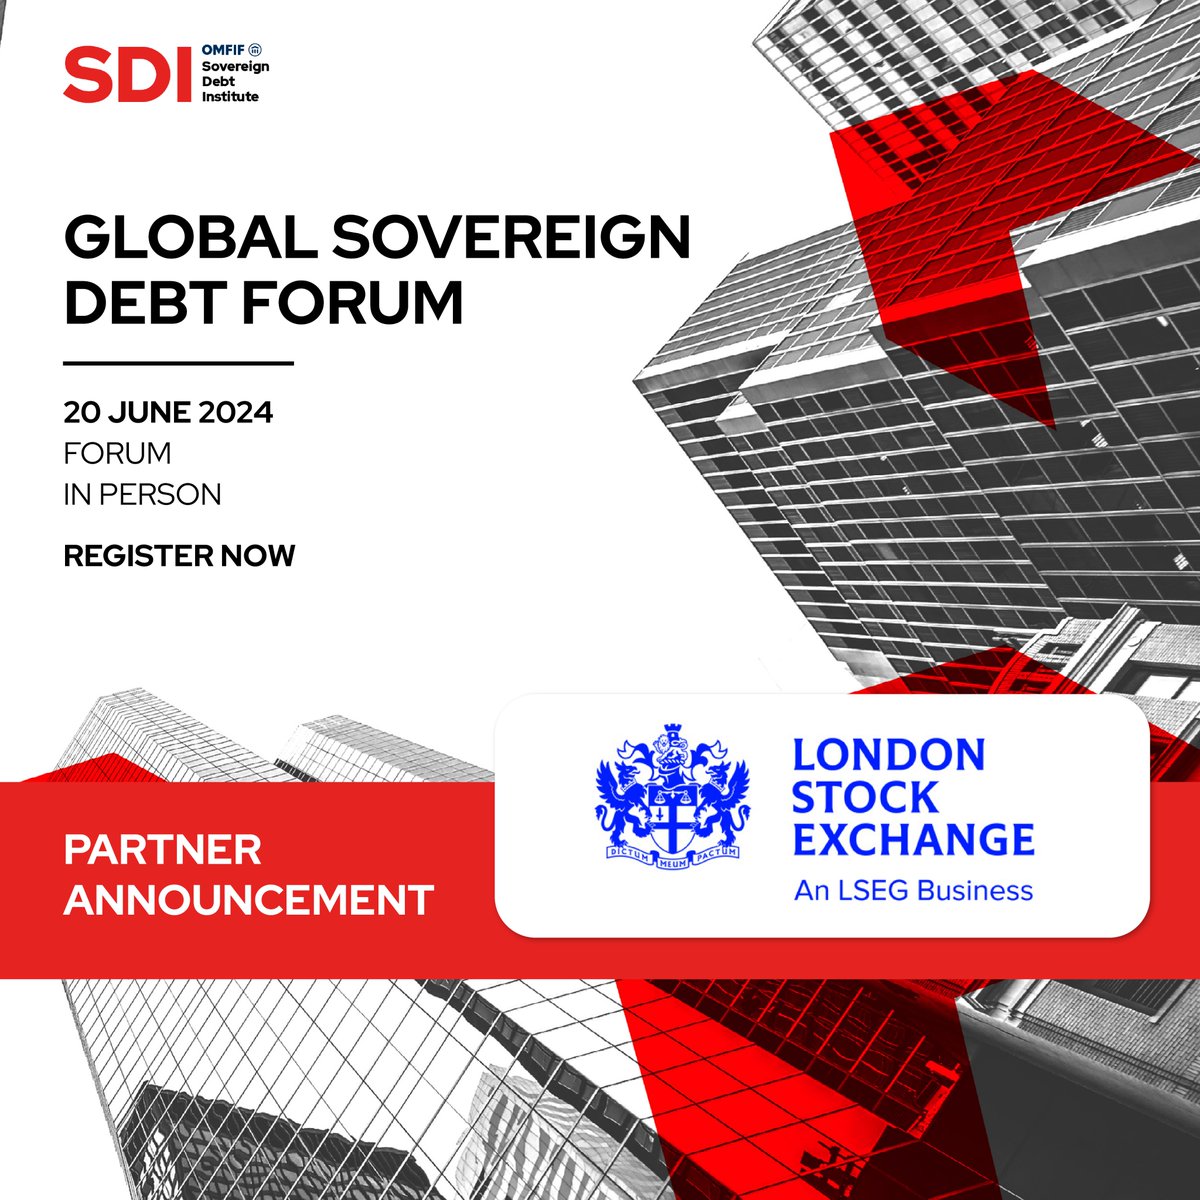 We are pleased to announce that @LSEGplc is partnering with the Global sovereign debt forum in June. Find out more about the forum and register to attend here: omfif.org/global-soverei…